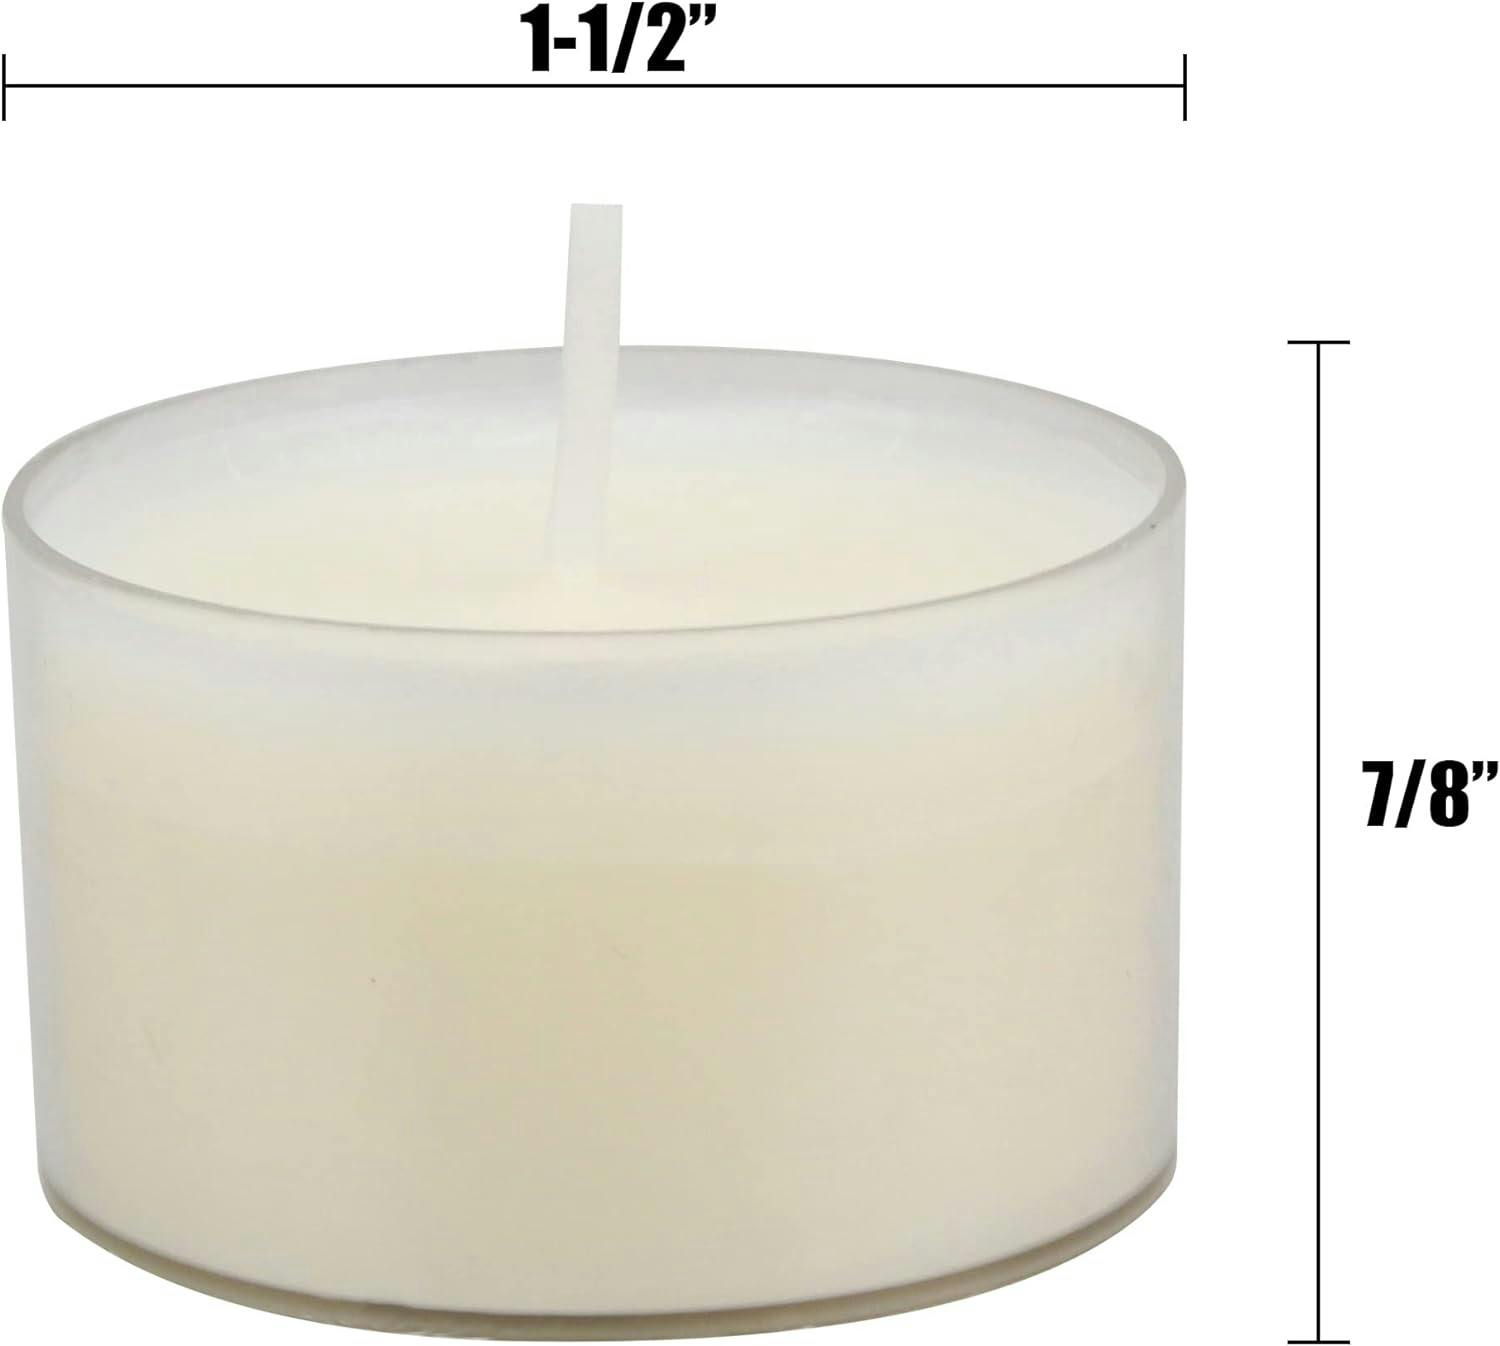 Sustainable Palm Wax White Tealight Candles, 96 Pack